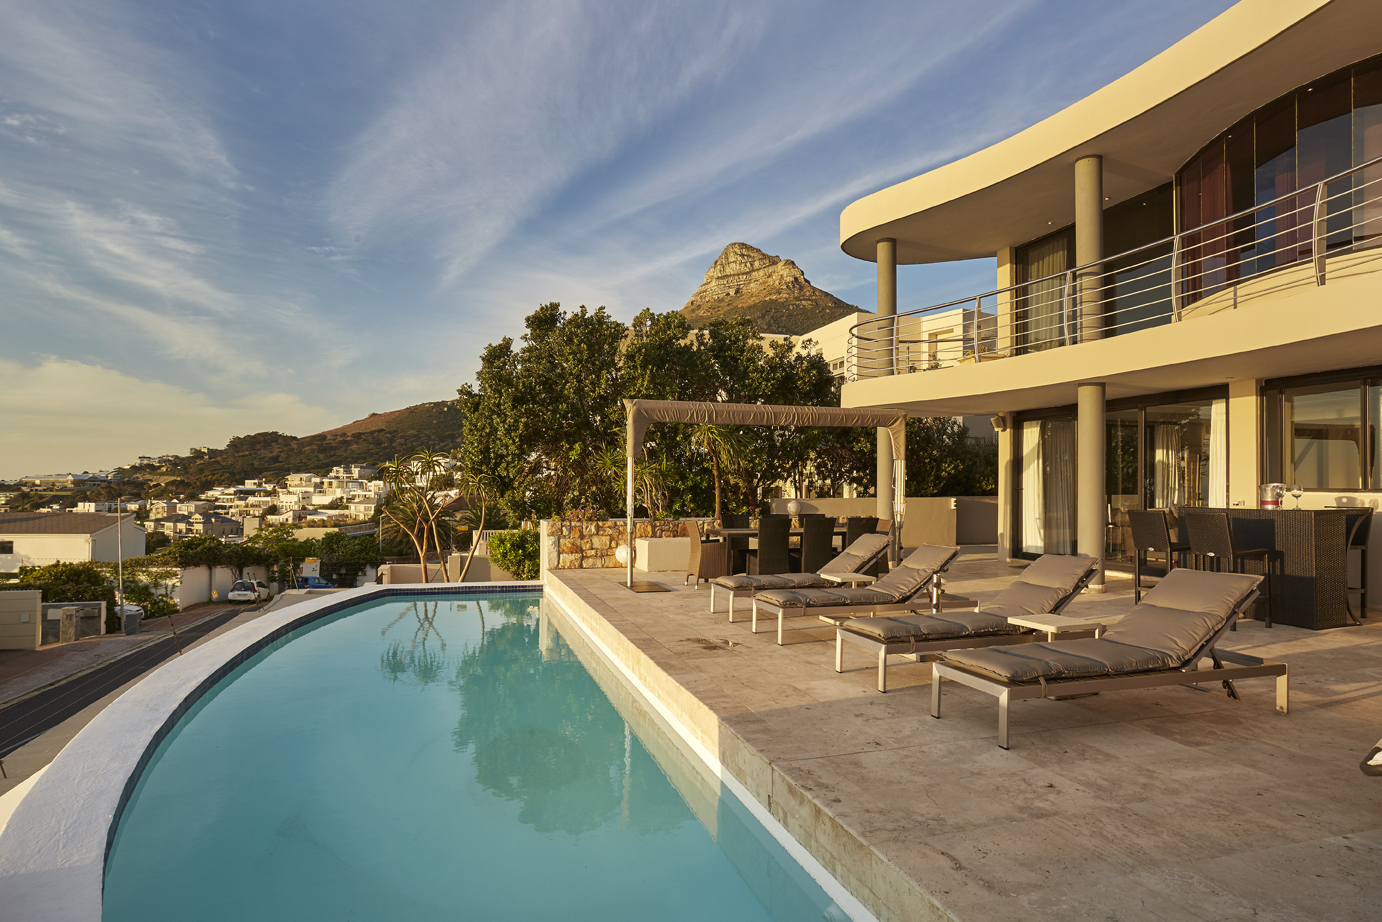 Photo 12 of Villa Waves accommodation in Camps Bay, Cape Town with 4 bedrooms and 4 bathrooms